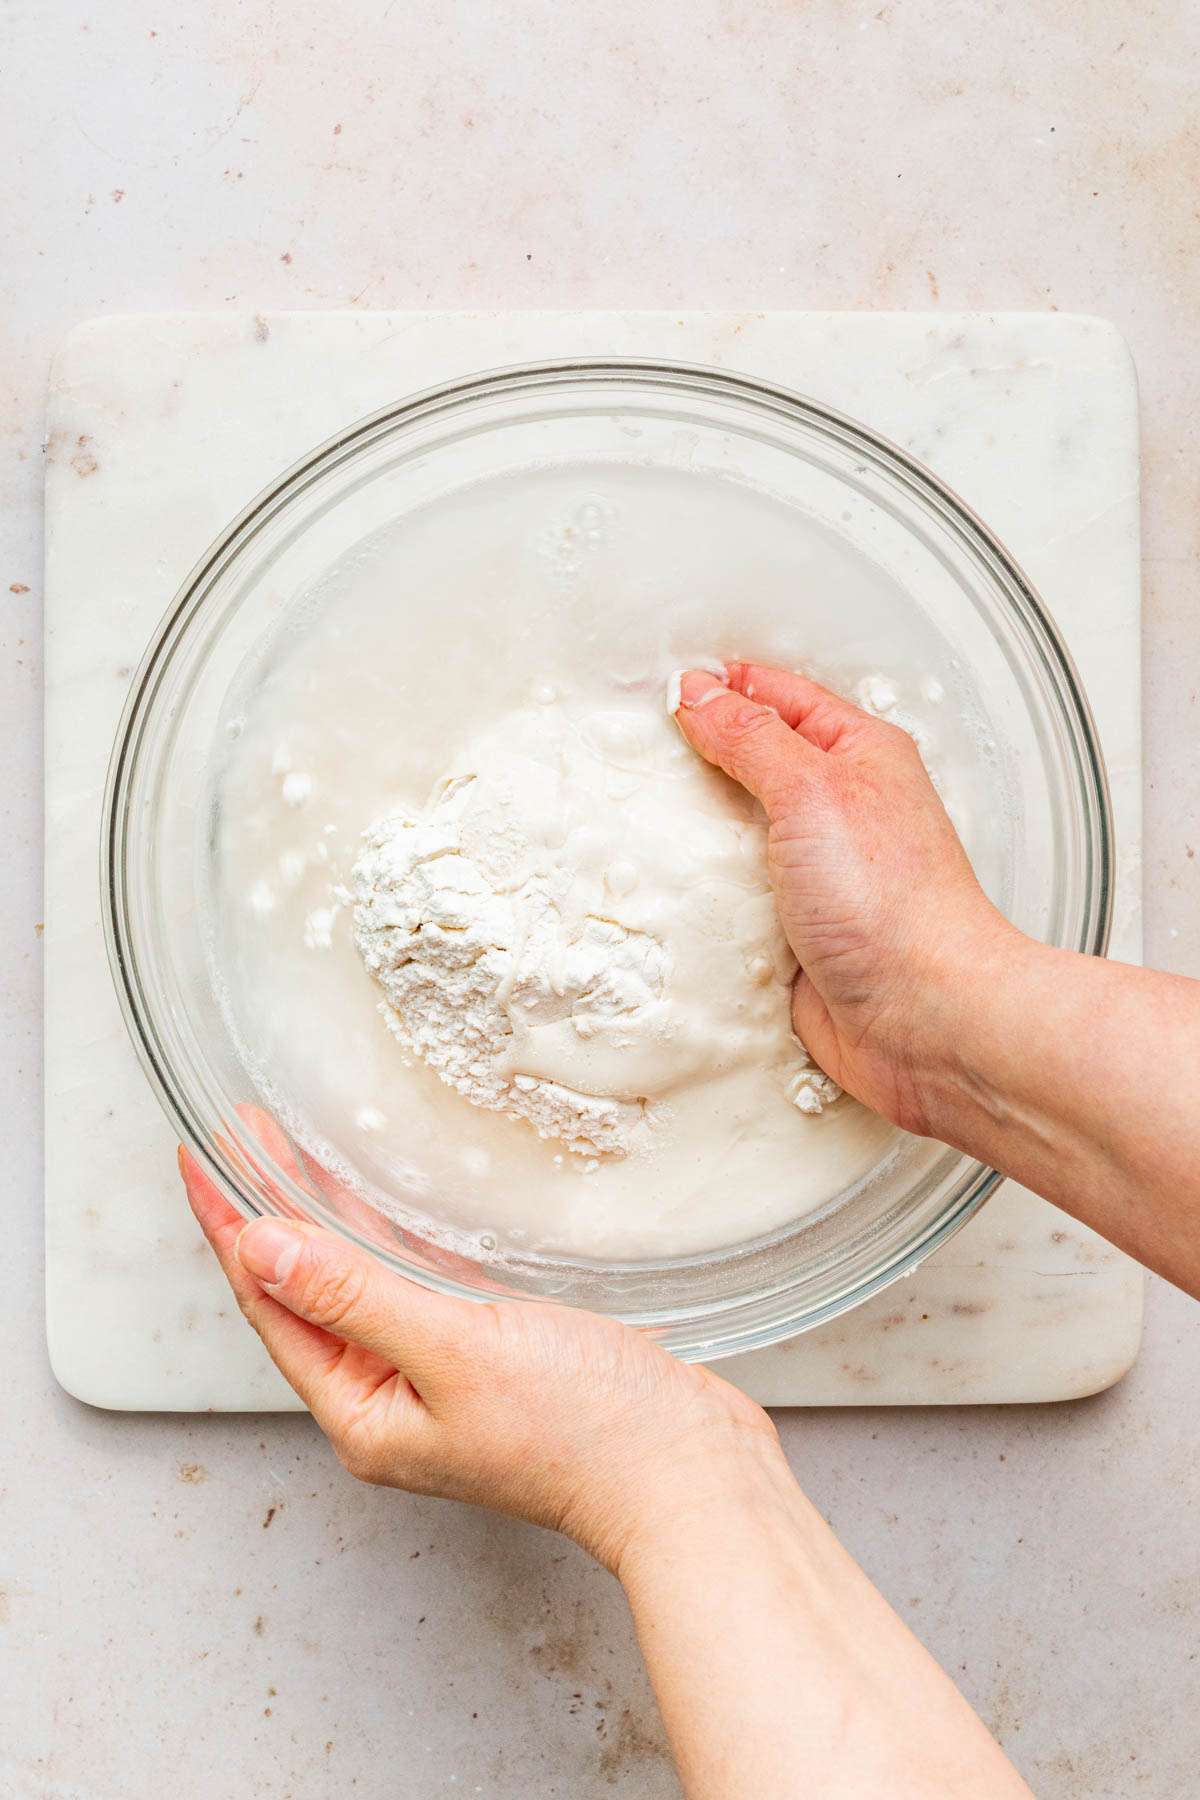 A hand reaching into a bowl of unmixed ingredients.